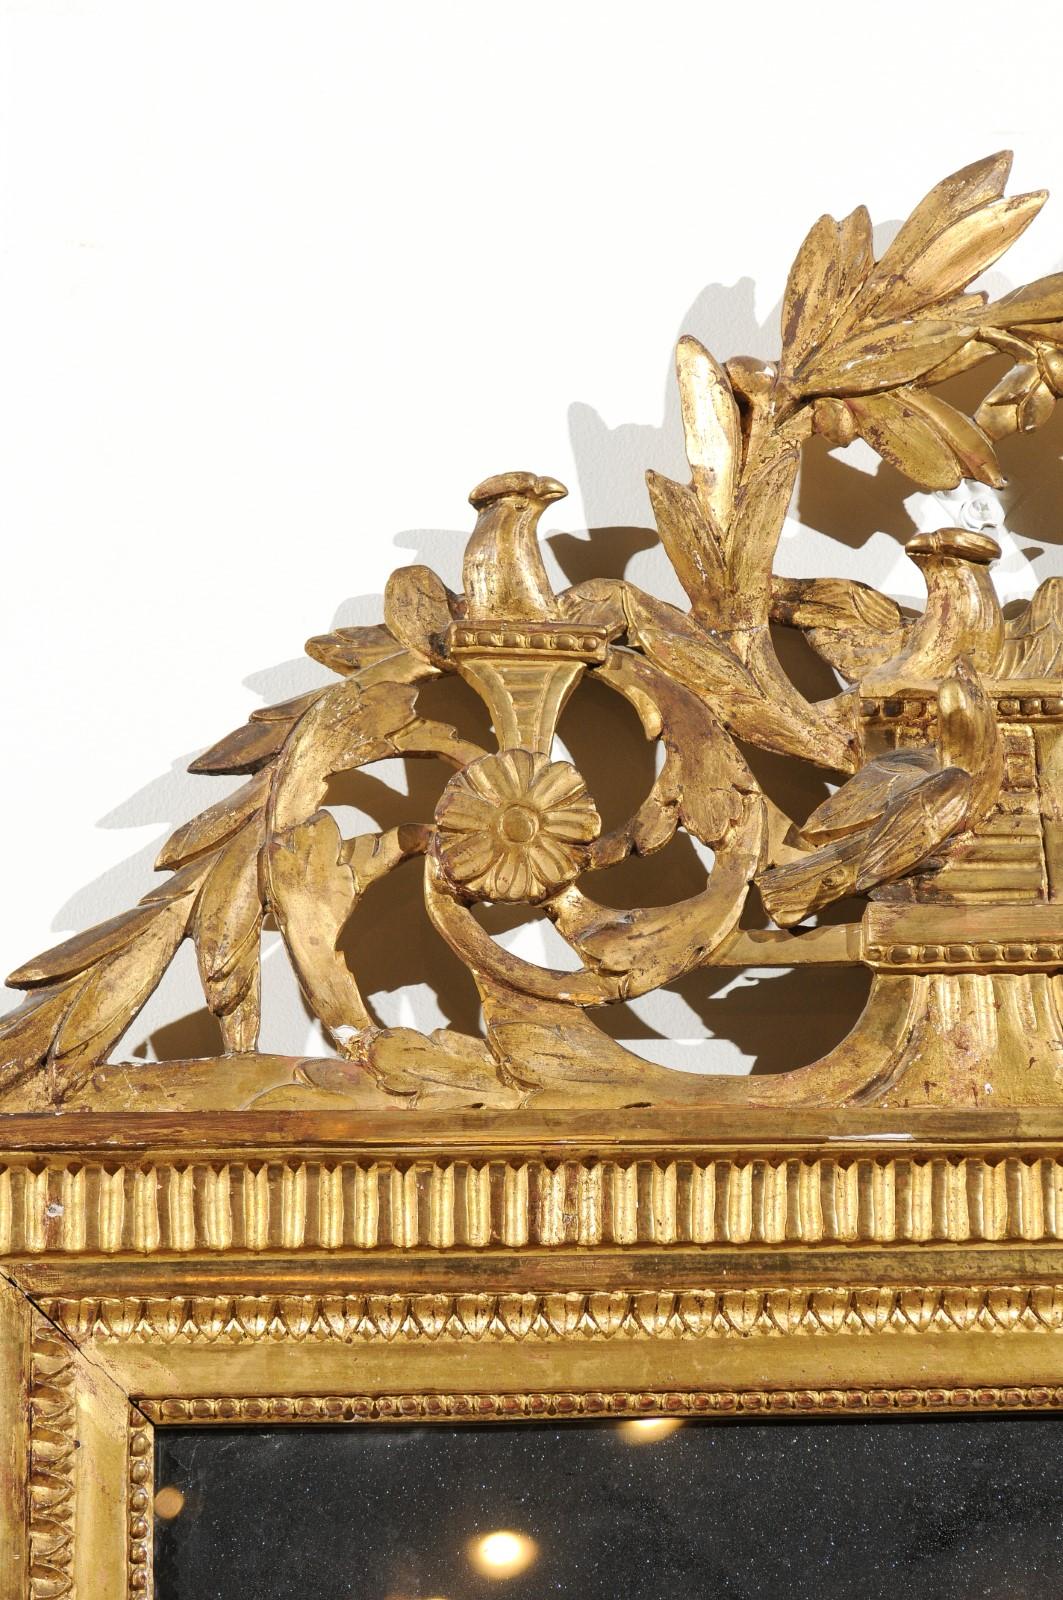 An Italian giltwood crested mirror from the 19th century, with carved birds and olive tree wreath. Born in Italy during the 19th century, this exquisite wall mirror attracts our attention with its gilded tones and skillfully carved crest. Handsome